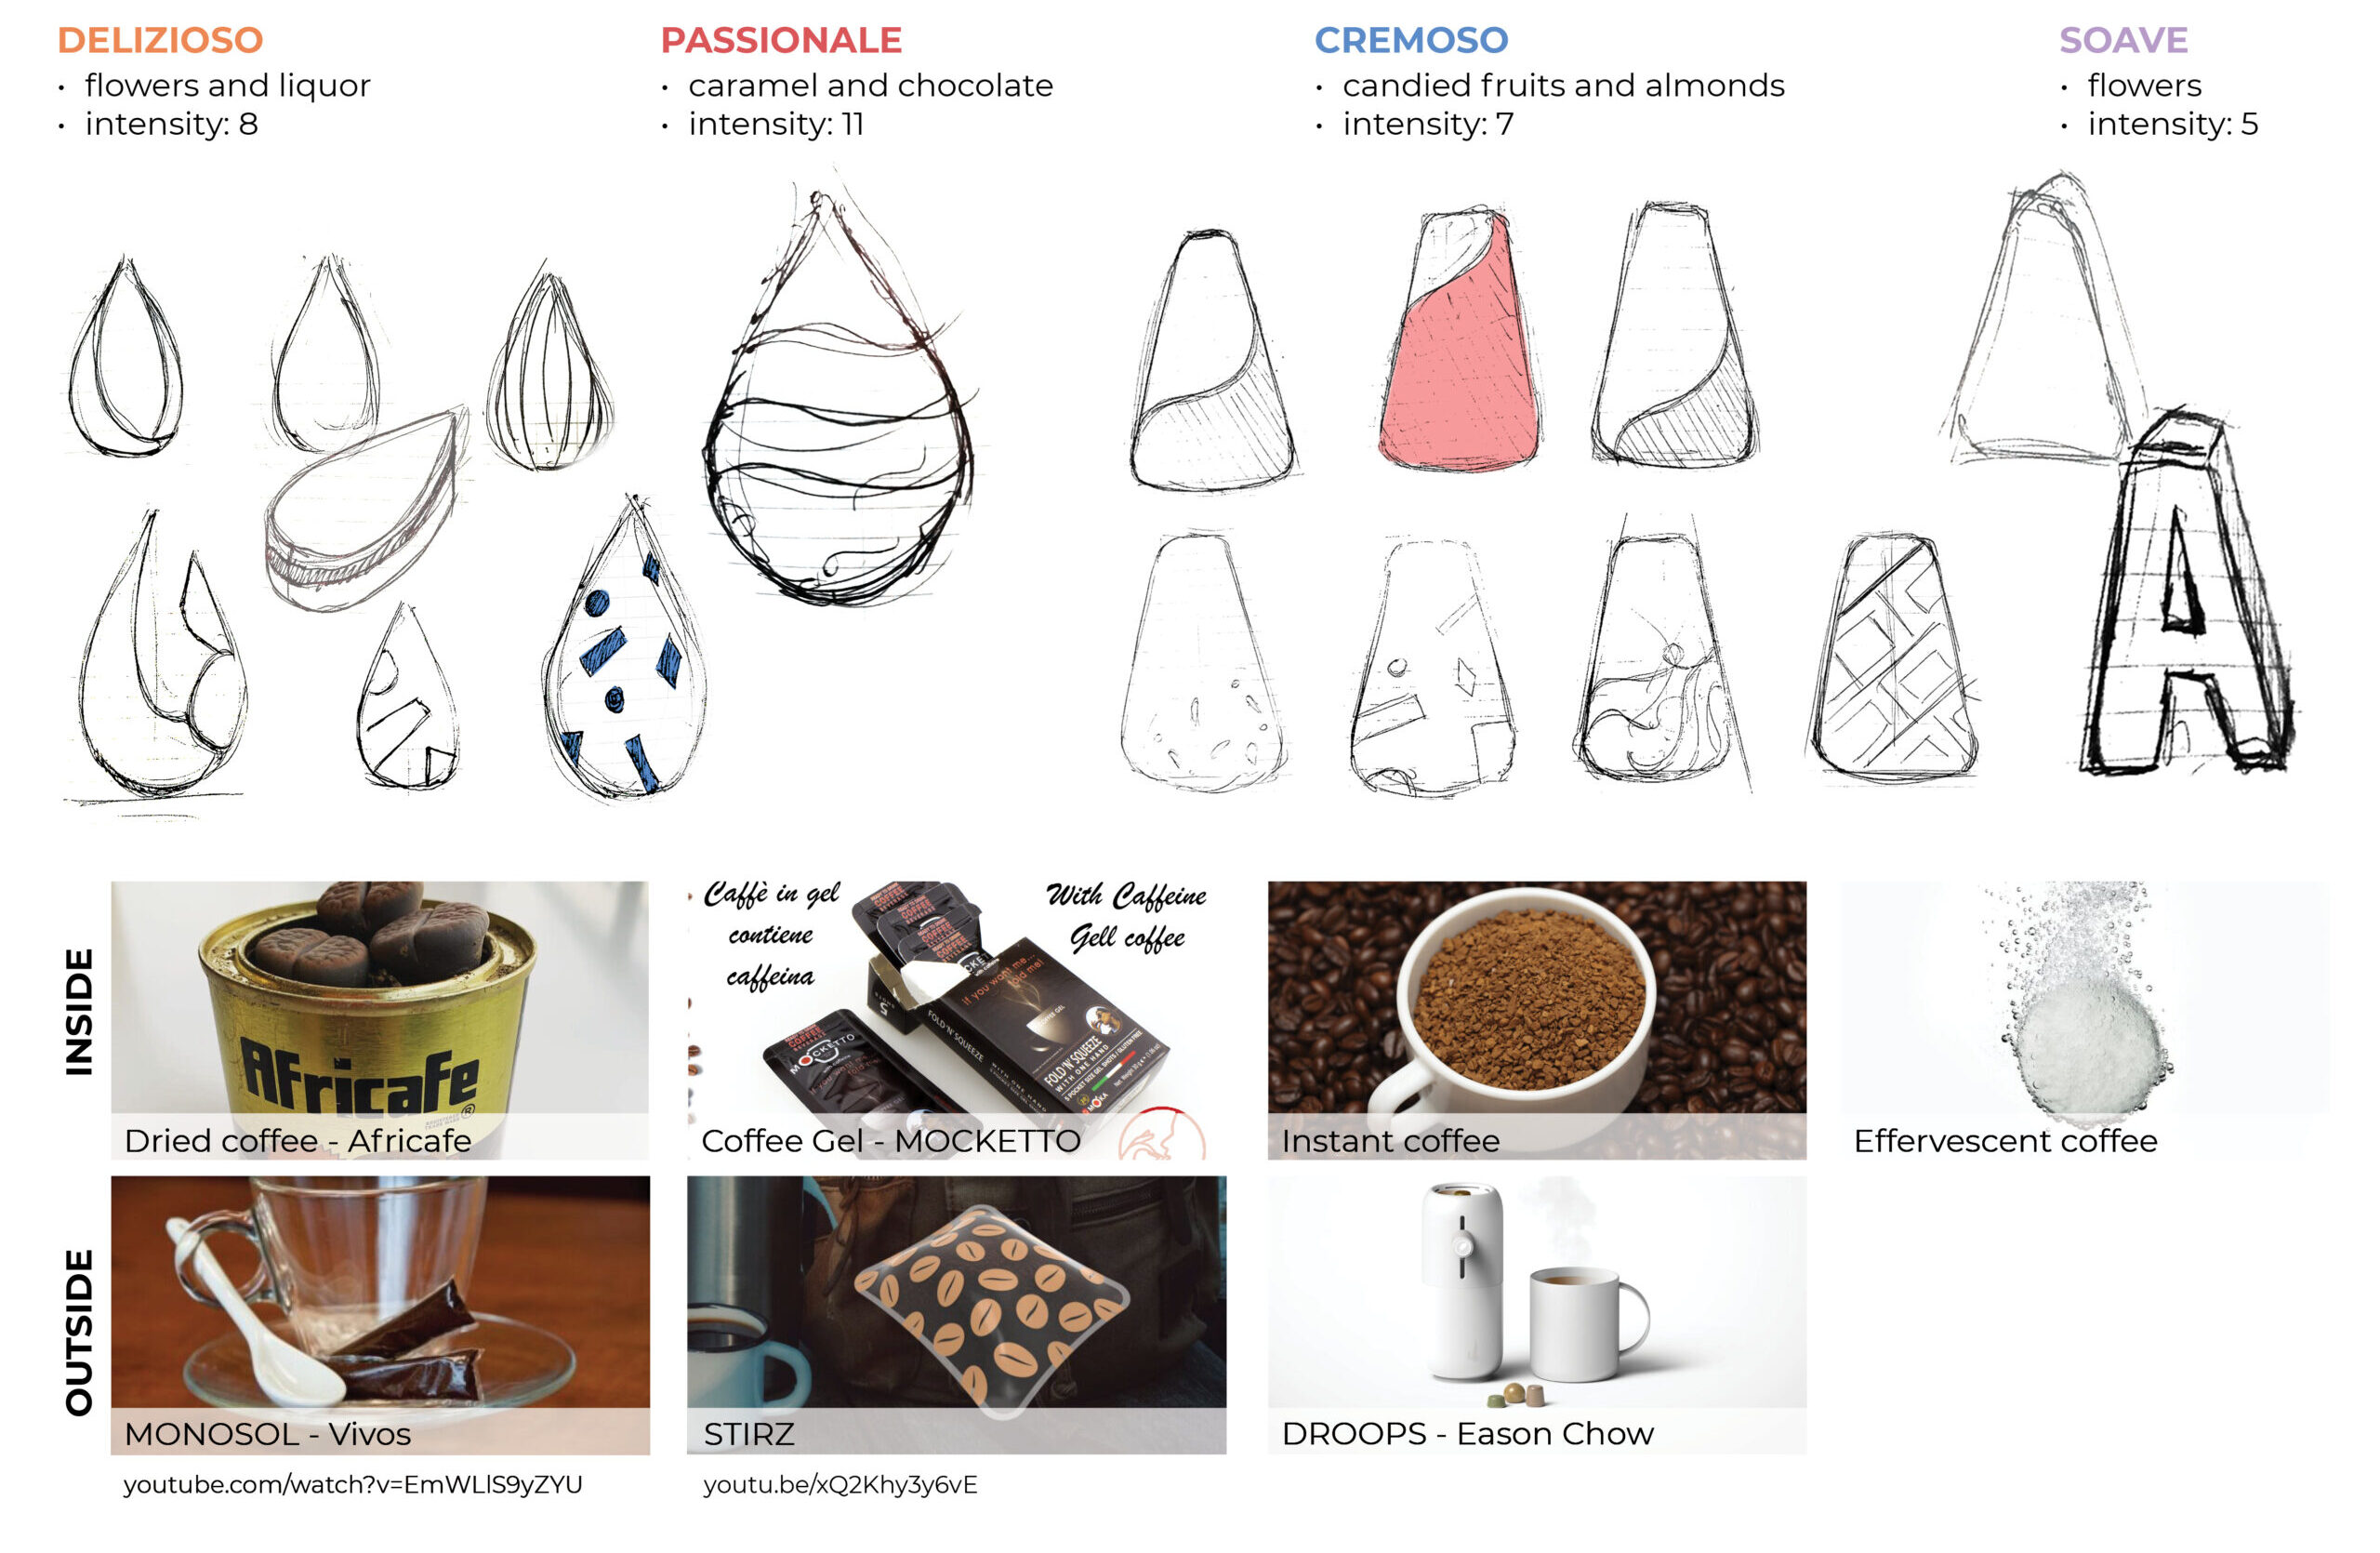 Description of the evolution of coffee capsules with edible film